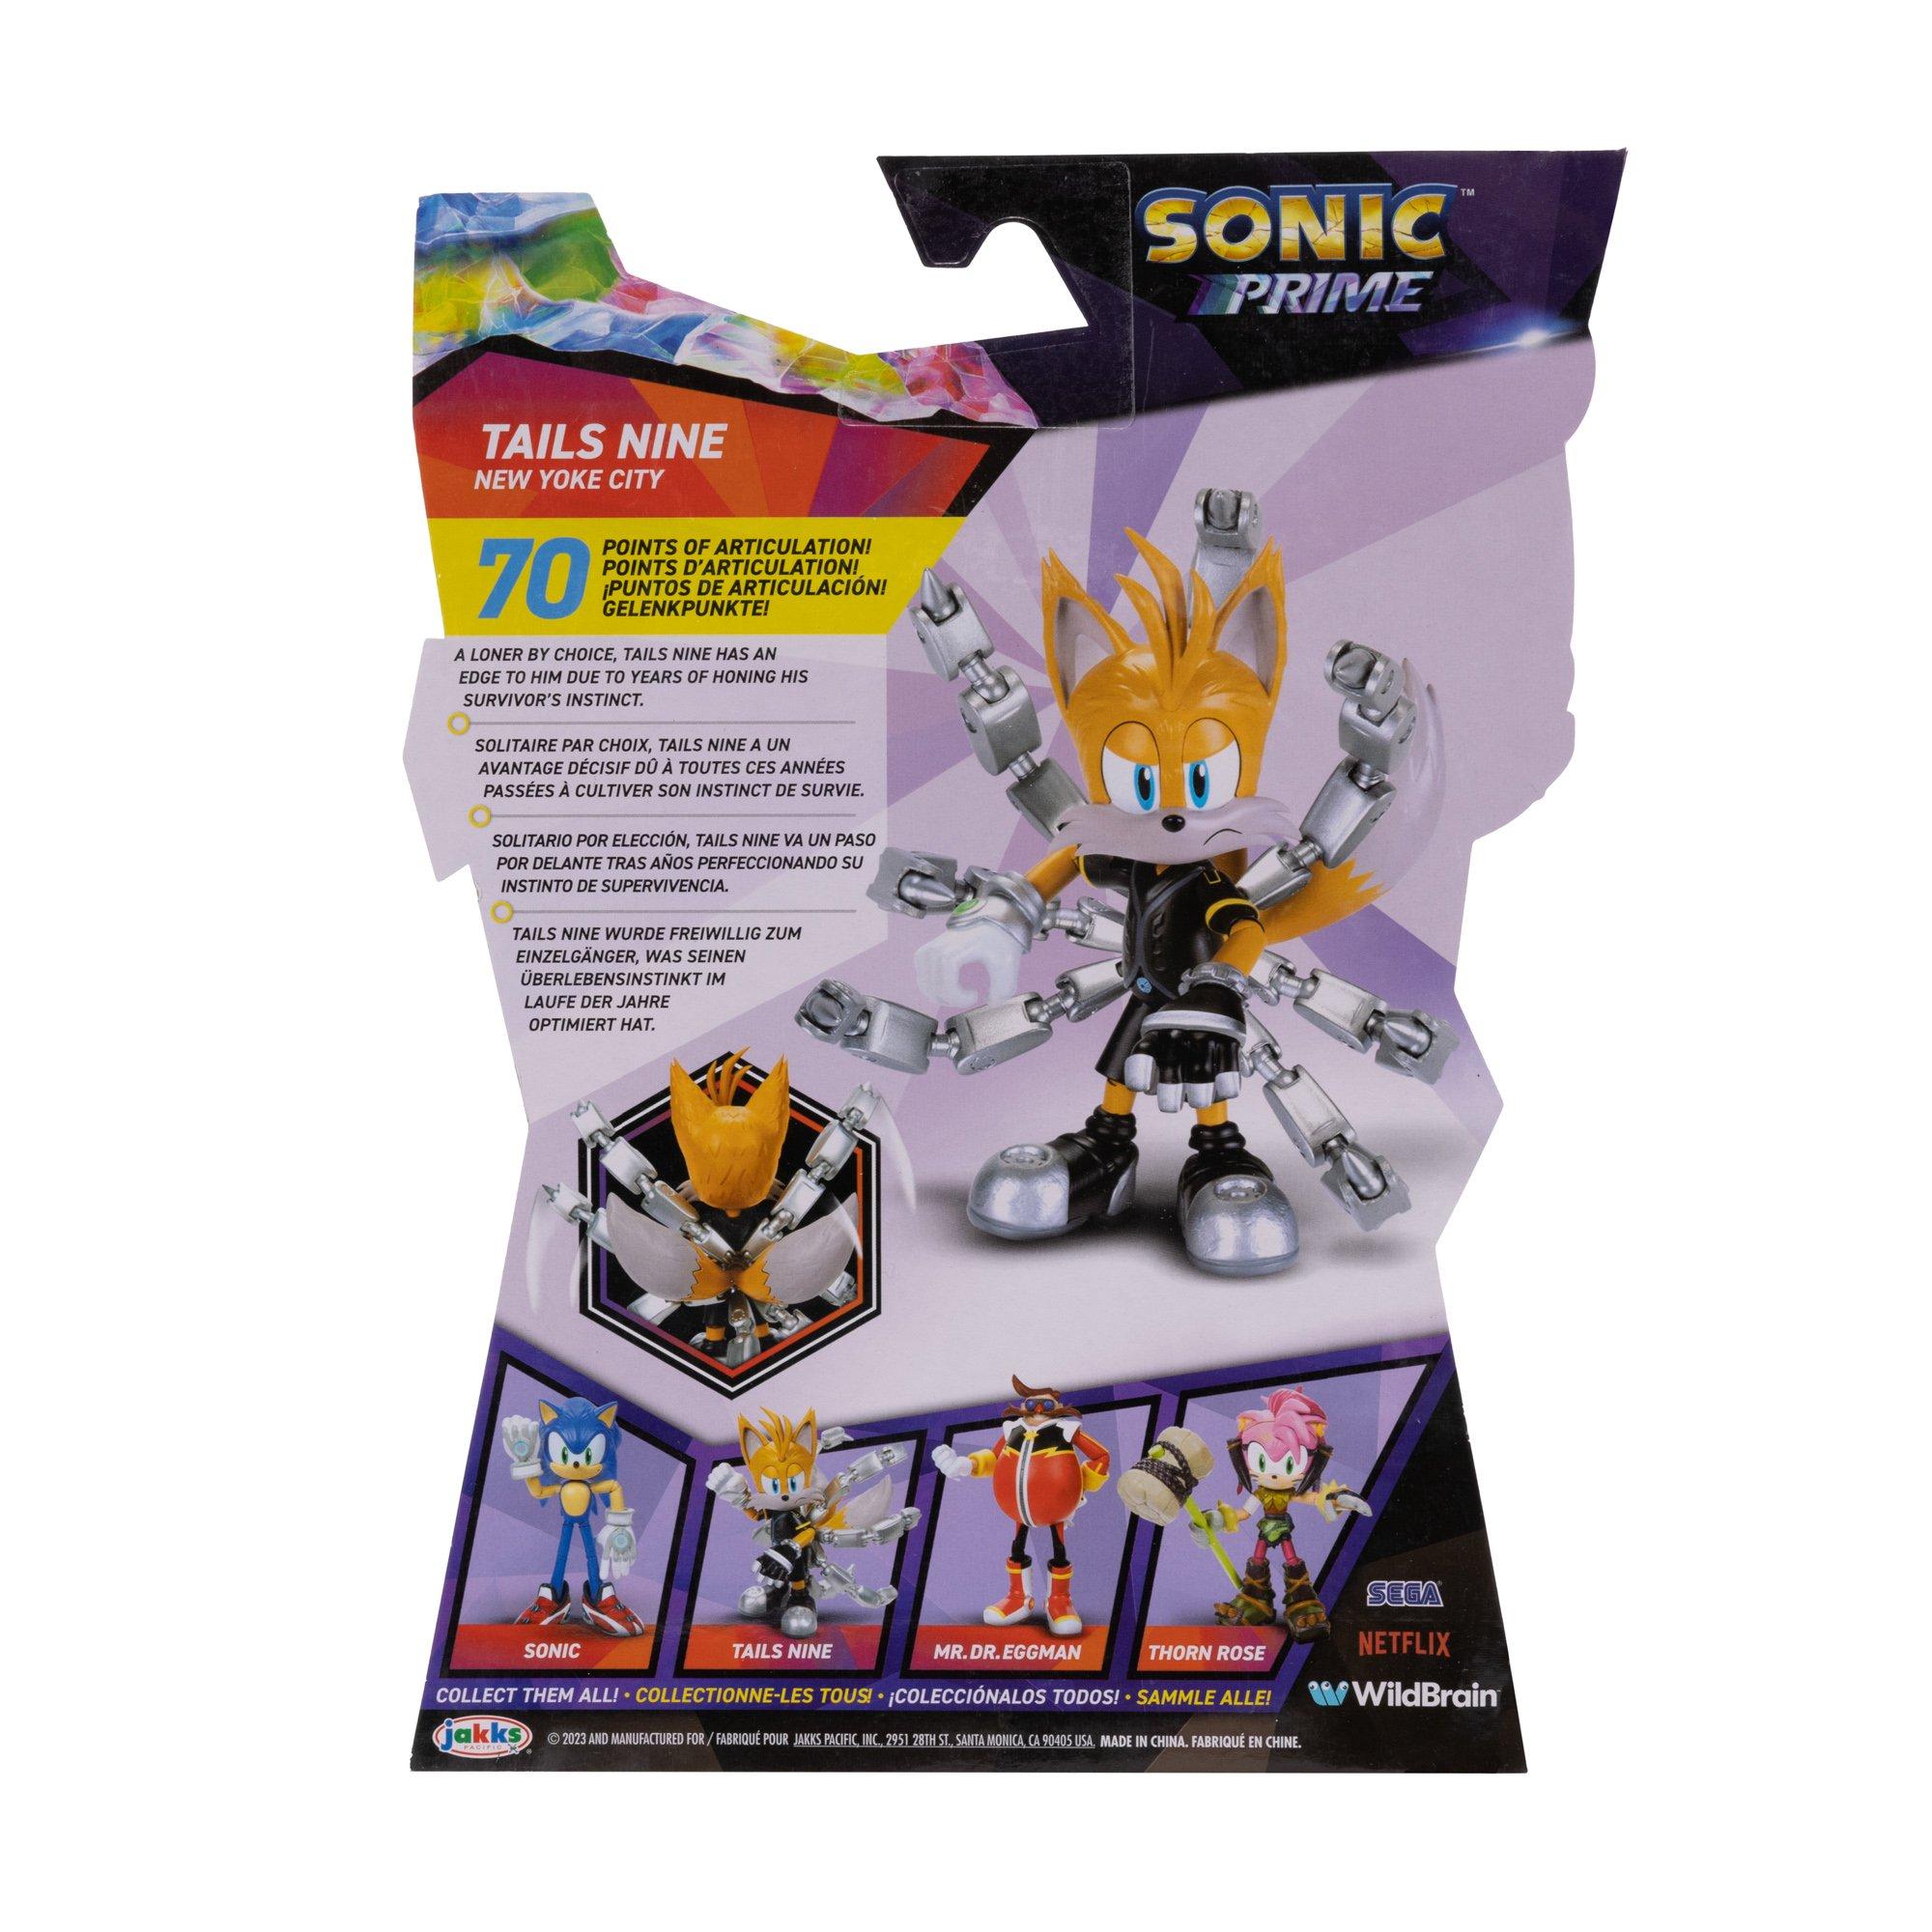  Sonic the Hedgehog 2 The Movie 4 Articulated Action Figure  Collection (Tails) : Toys & Games